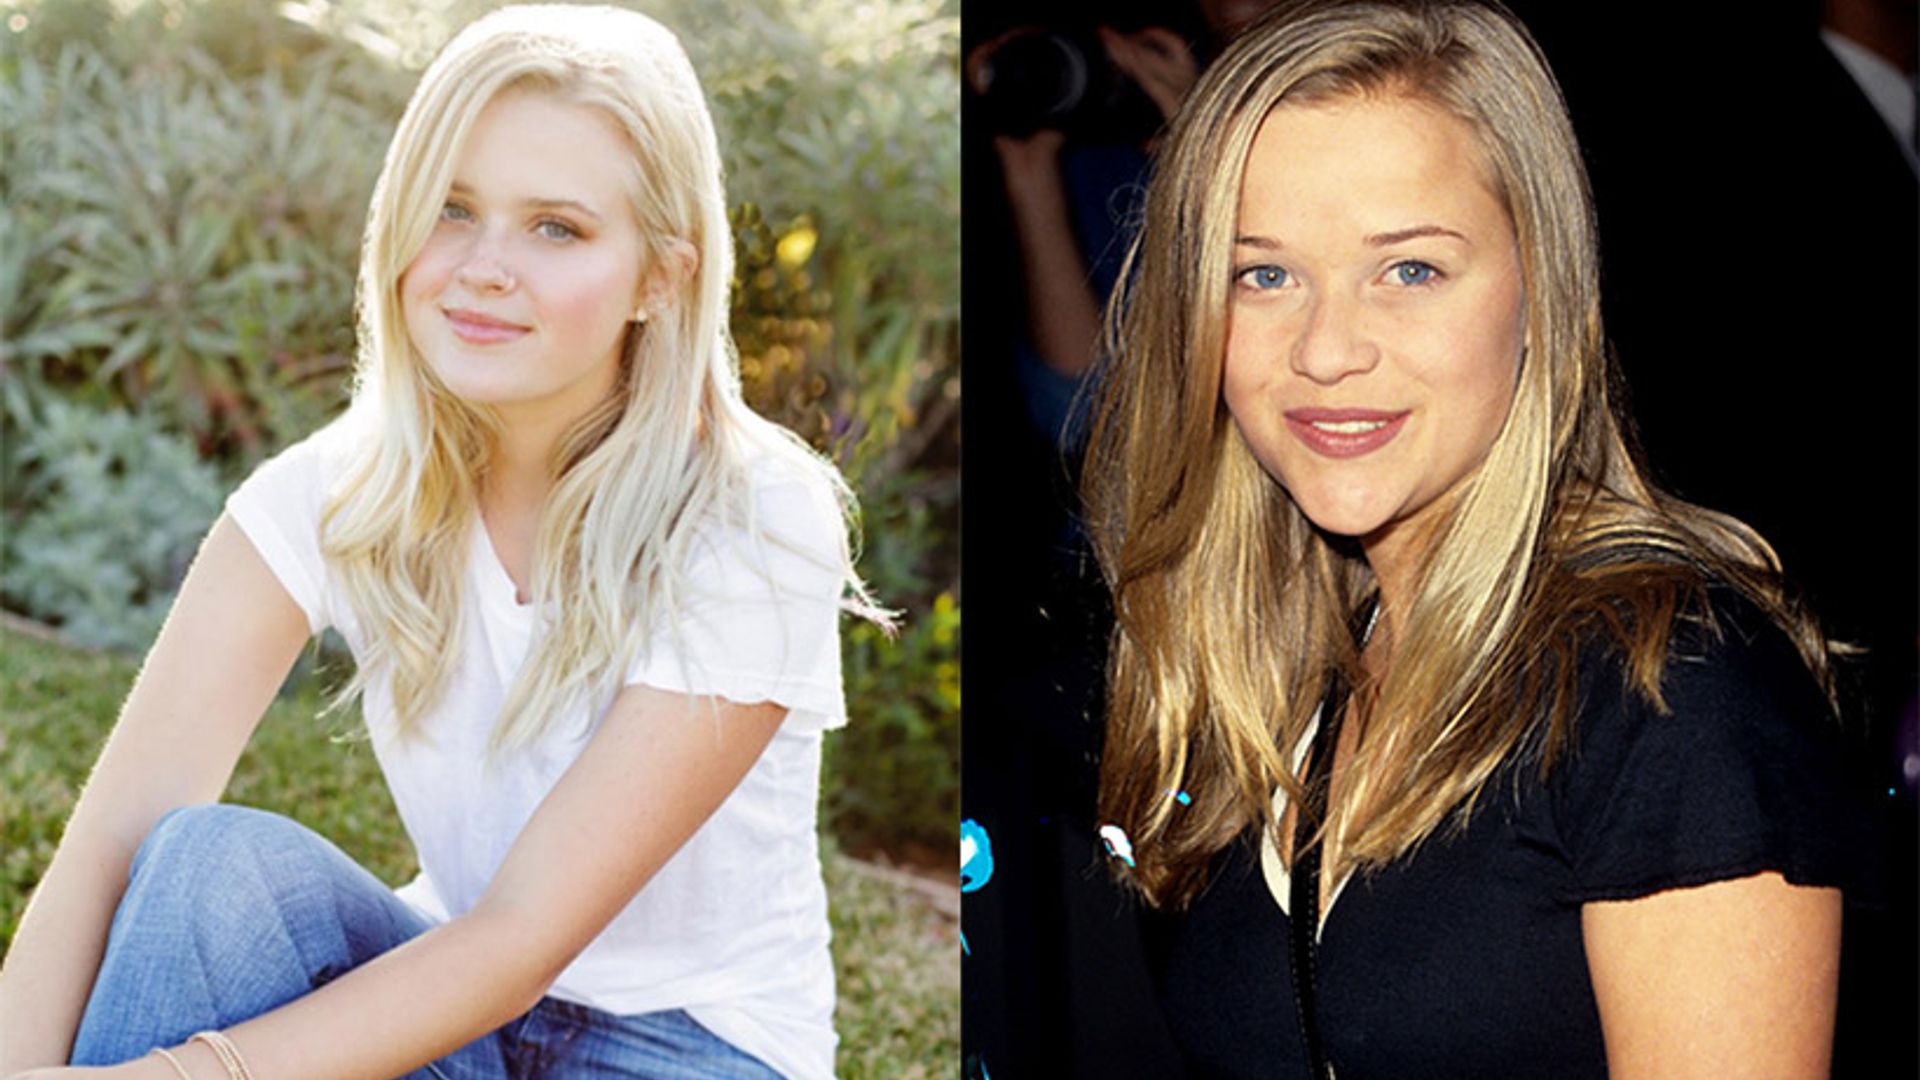 Ava Phillipe is mum Reese Witherspoon’s double as she turns 18! Read the sweet birthday tributes